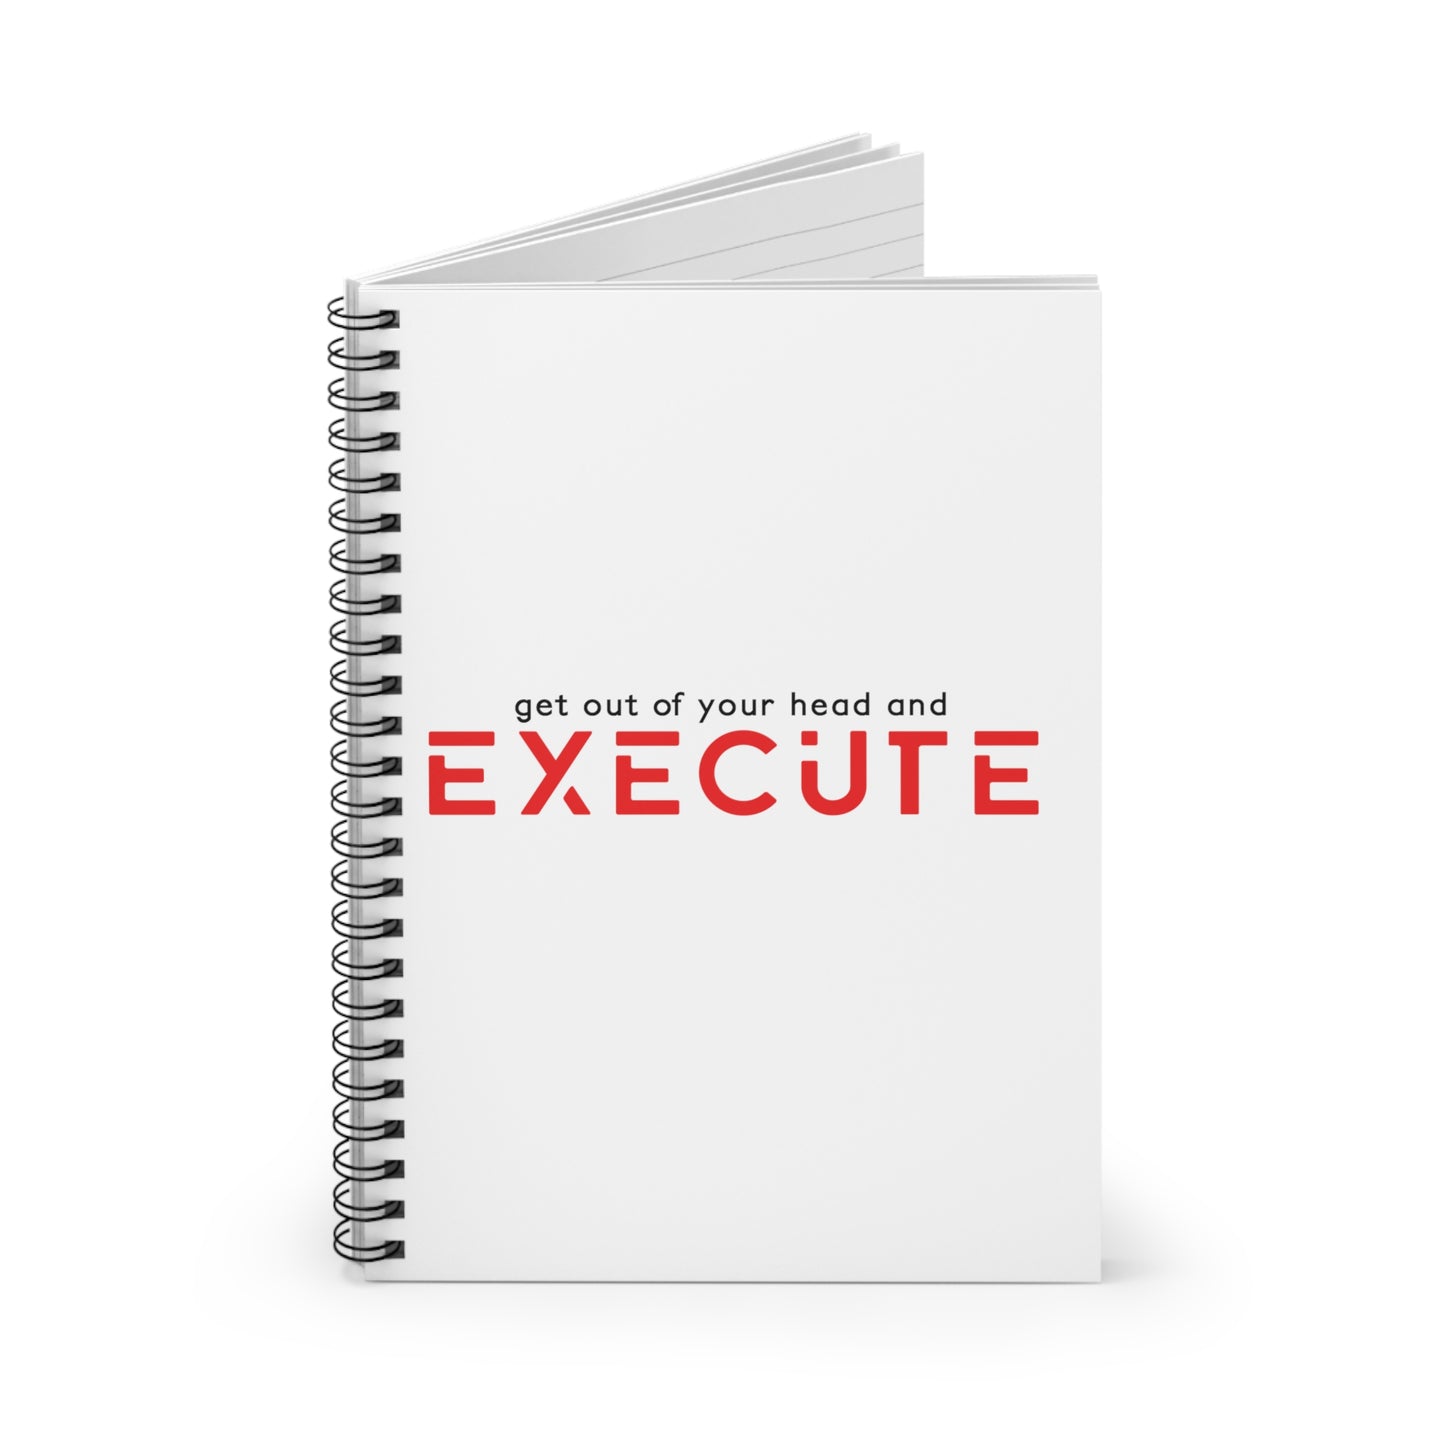 "Execute" Journal